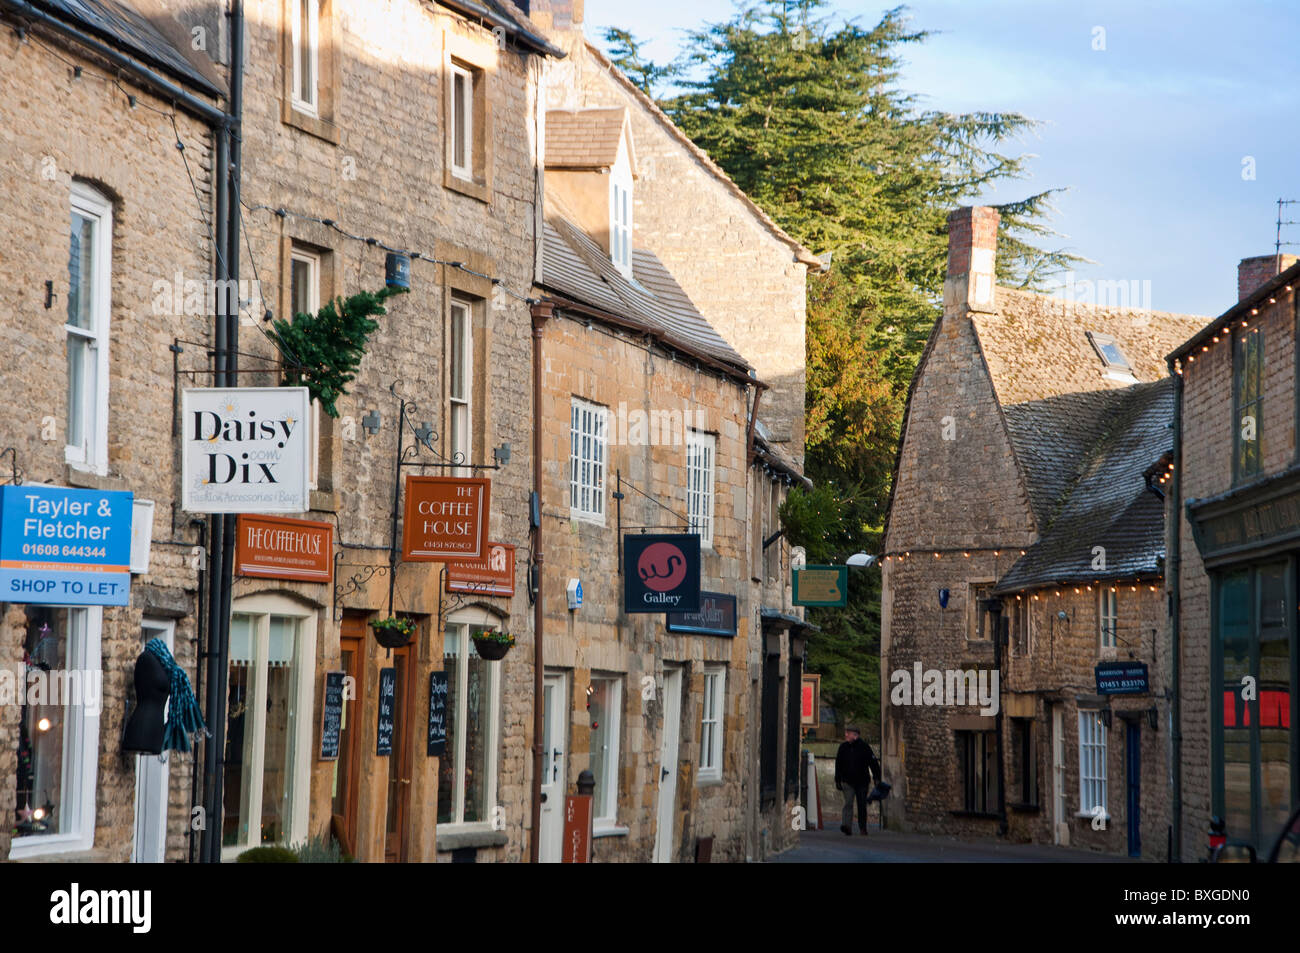 Shops in the Cotswold village of Stow on the wold, Gloucestershire, England Stock Photo